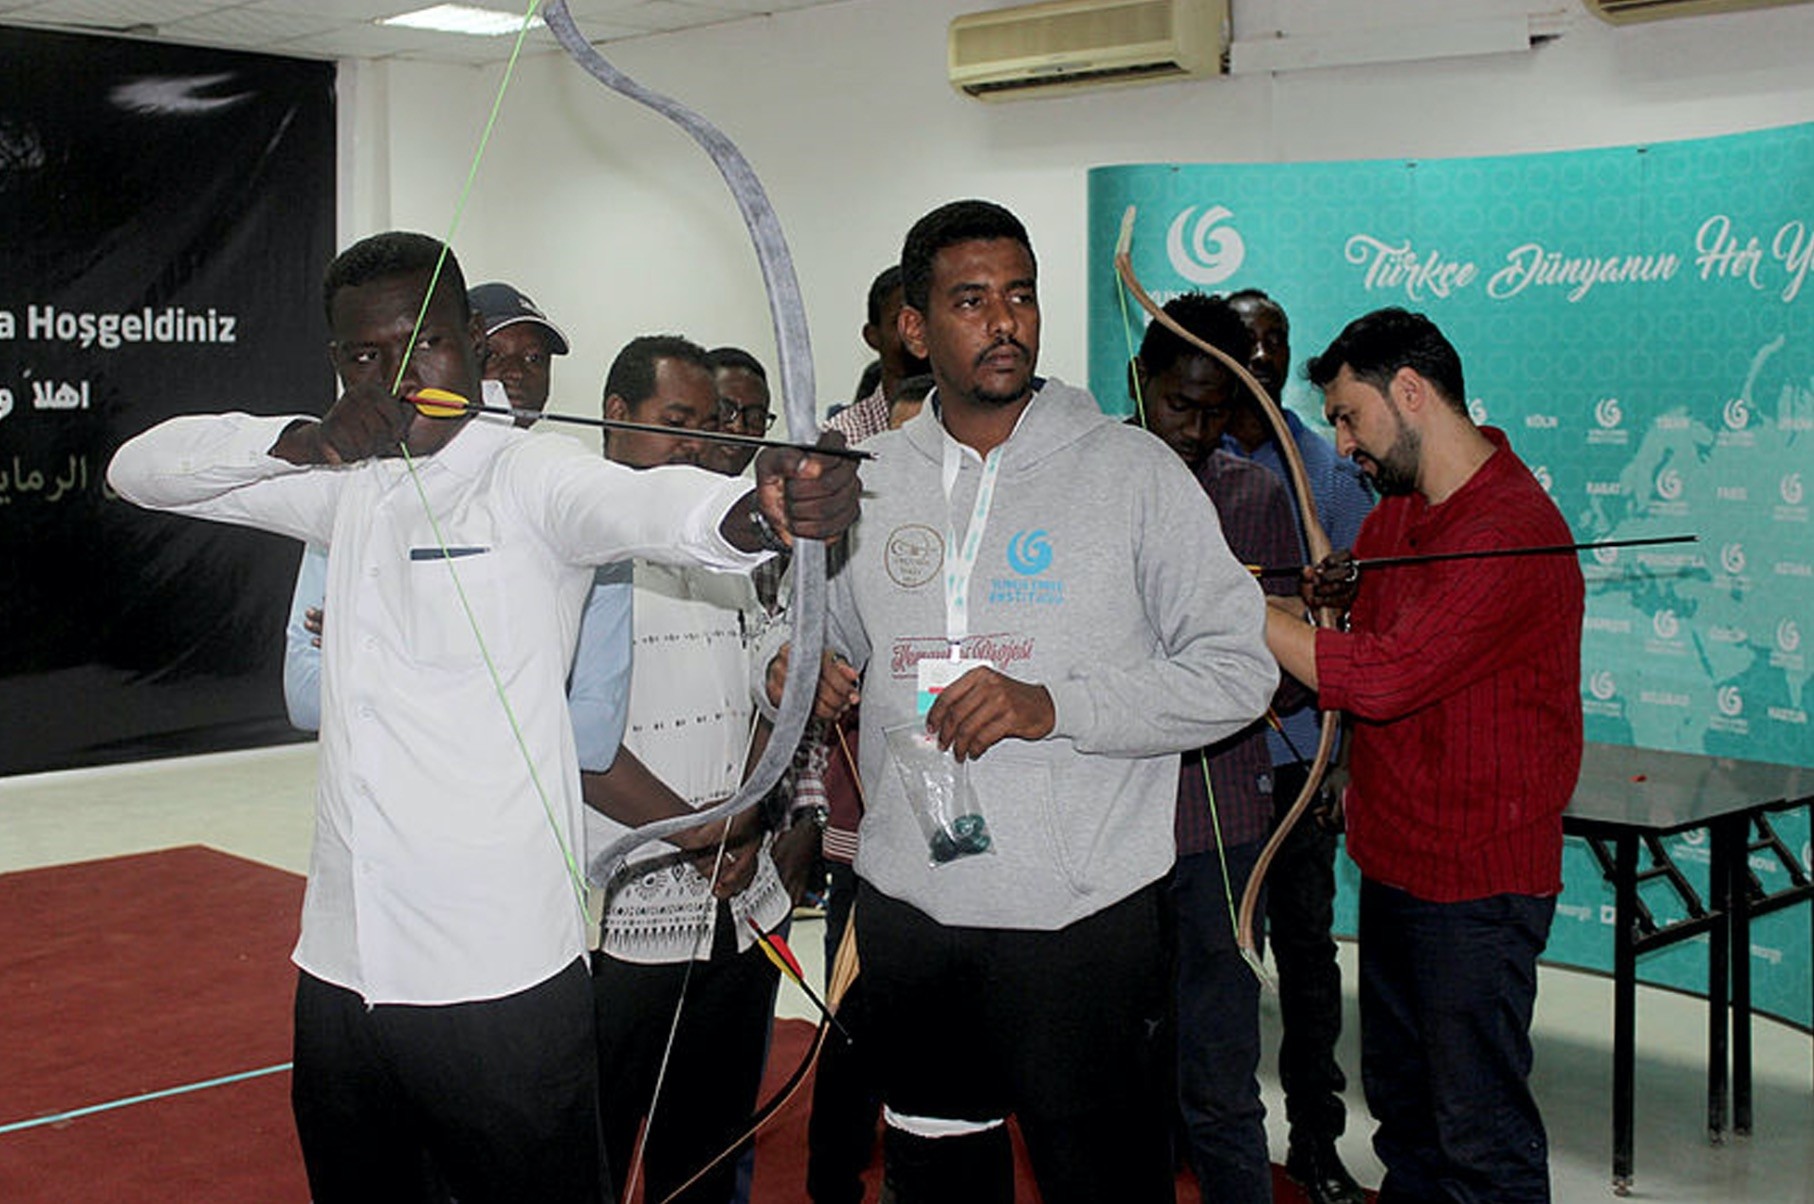 Having learned Turkish archery in Istanbul at the Yunus Emre Institute, archery trainers now teach to Sudanese trainees.